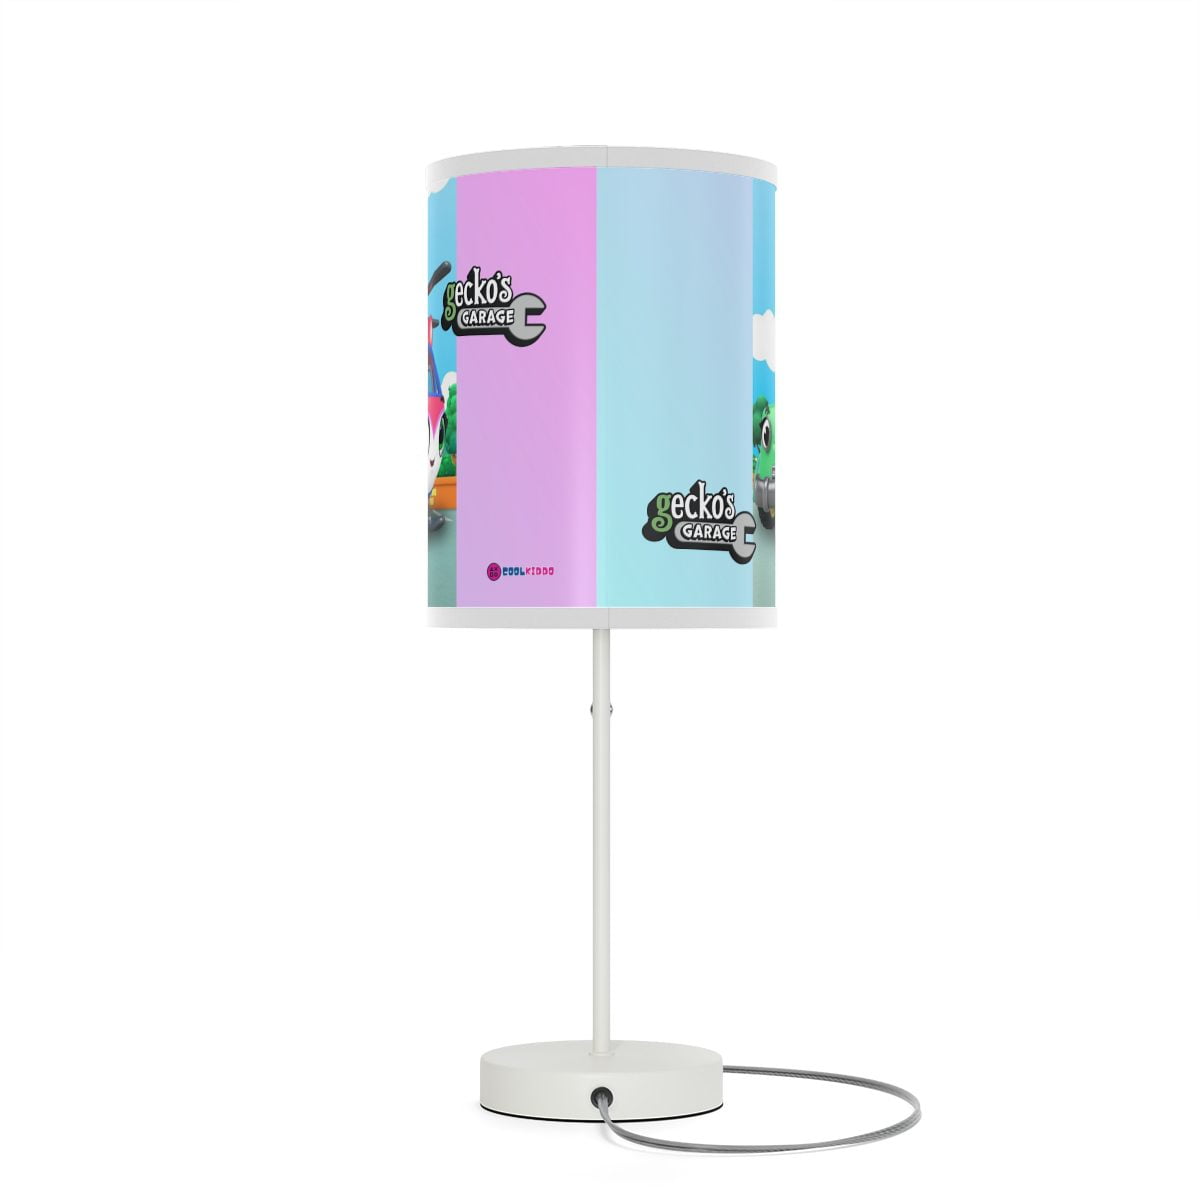 Gecko’s Garage Main Characters Lamp on a Stand Cool Kiddo 12